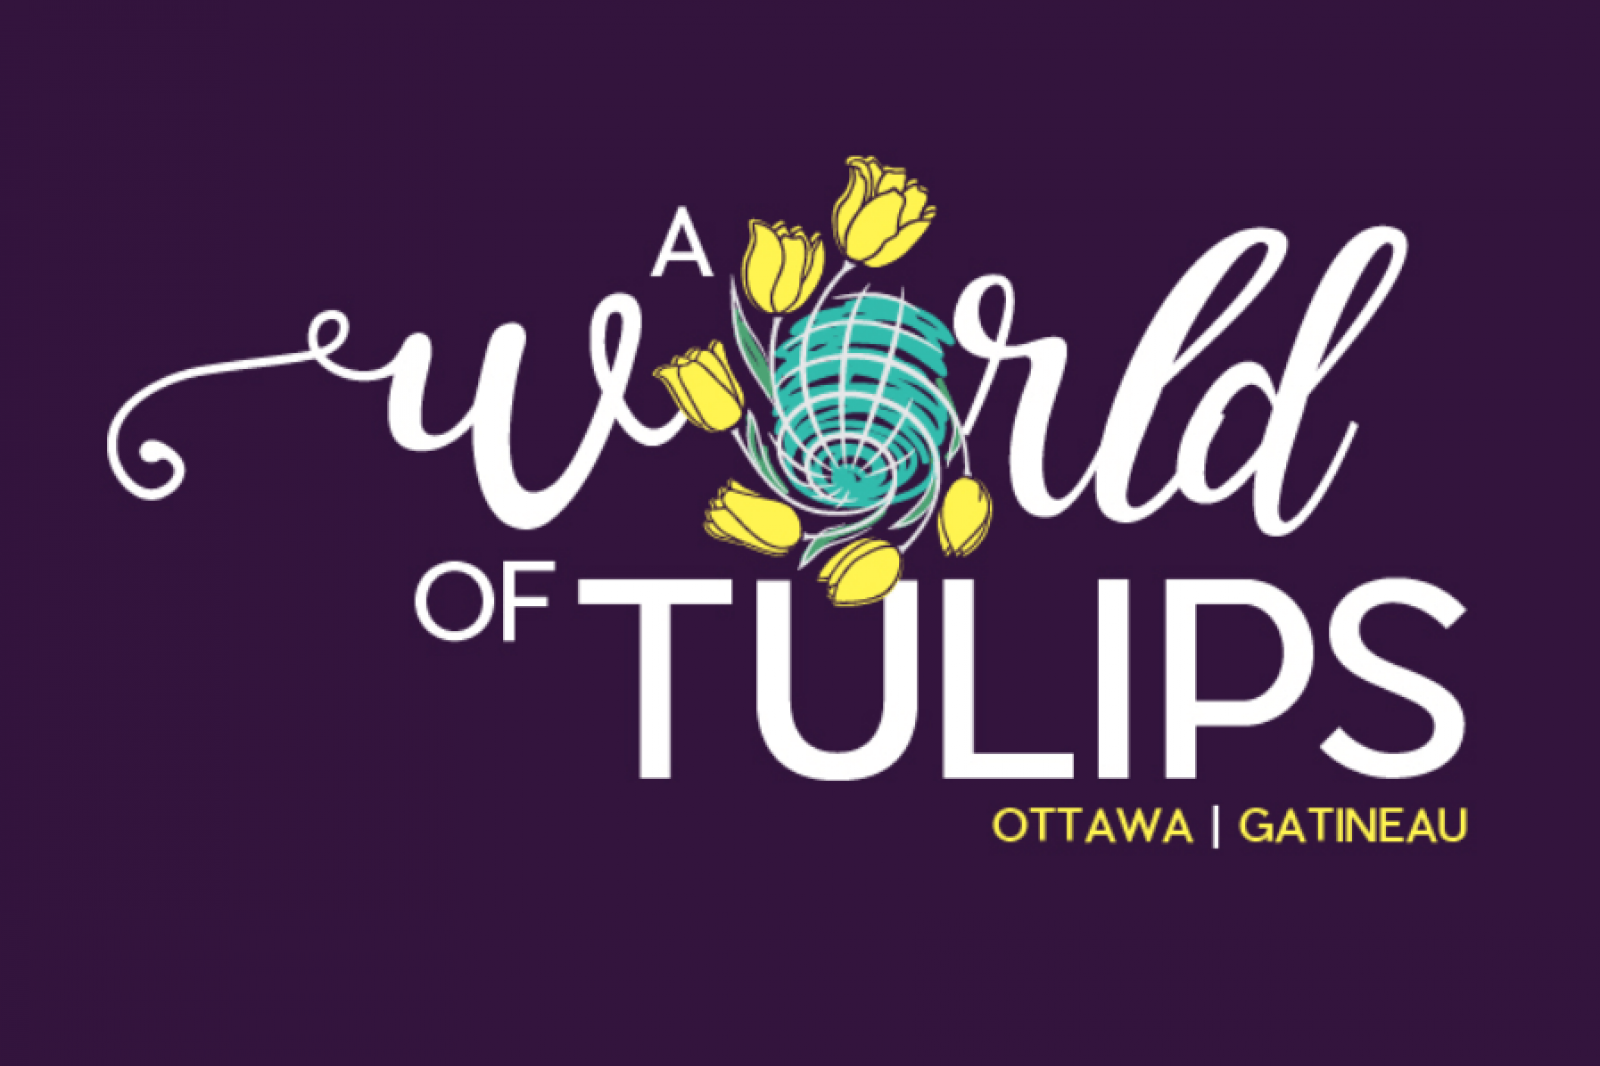 Tulip Festival welcomes festivals from around the world